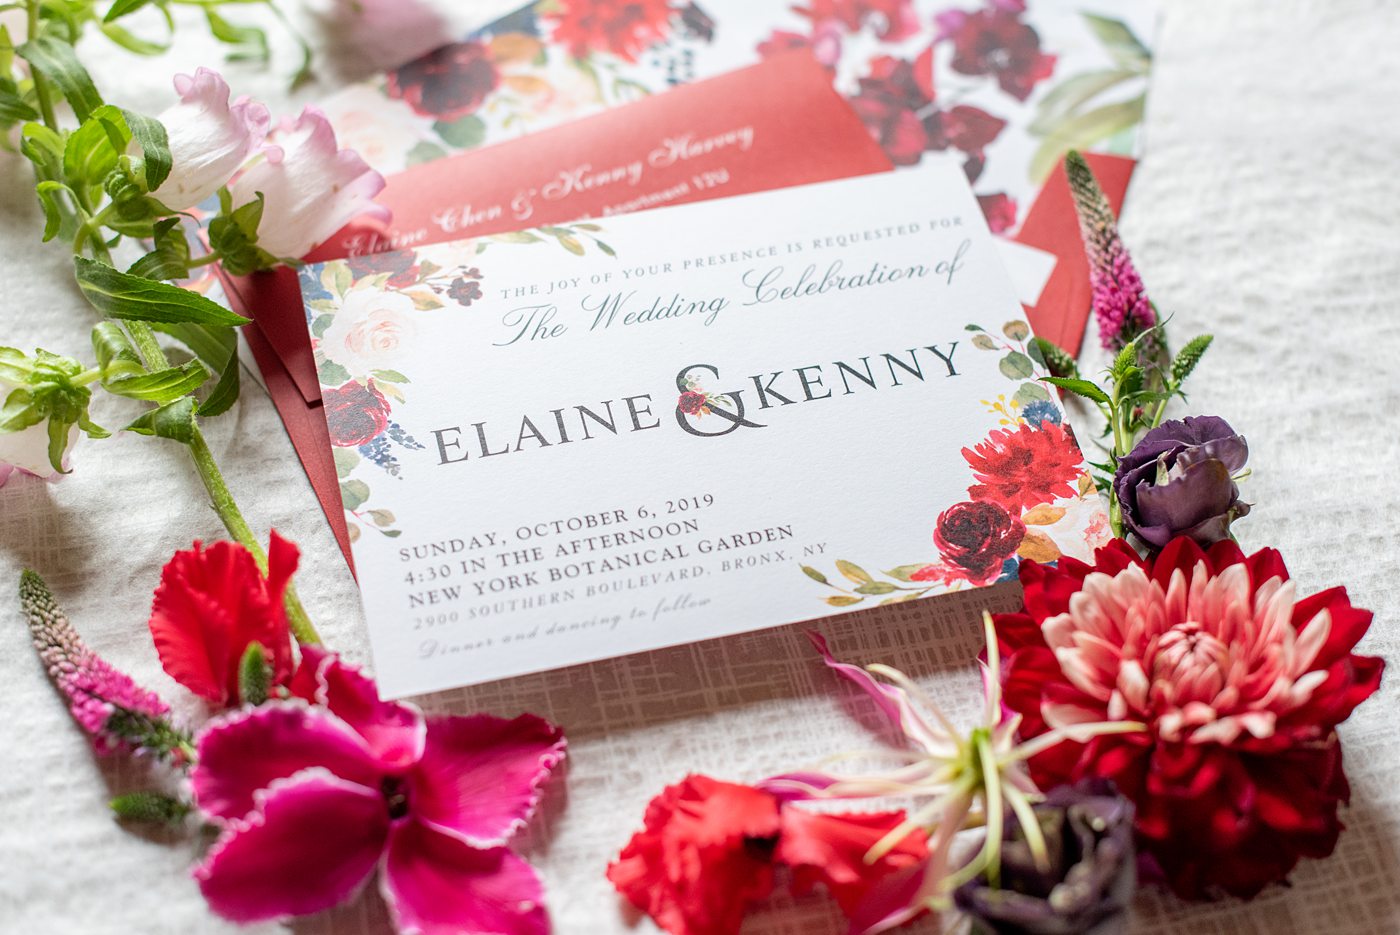 New York Botanical Garden wedding photos by Mikkel Paige Photography. The couple had red inspired details and an invitation to match. After the couple's engagement photoshoot in Manhattan I was so excited for their fall wedding near the Conservatory at the Terrace Room, at this NYC venue. #mikkelpaige #nybg #asianbride #redweddinginvitation #brideandgroom #newyorkbotanicalgardenwedding #NYBotanicalGarden #Bronxwedding #newyorkcityweddingvenue #weddingstationery #detailphotos